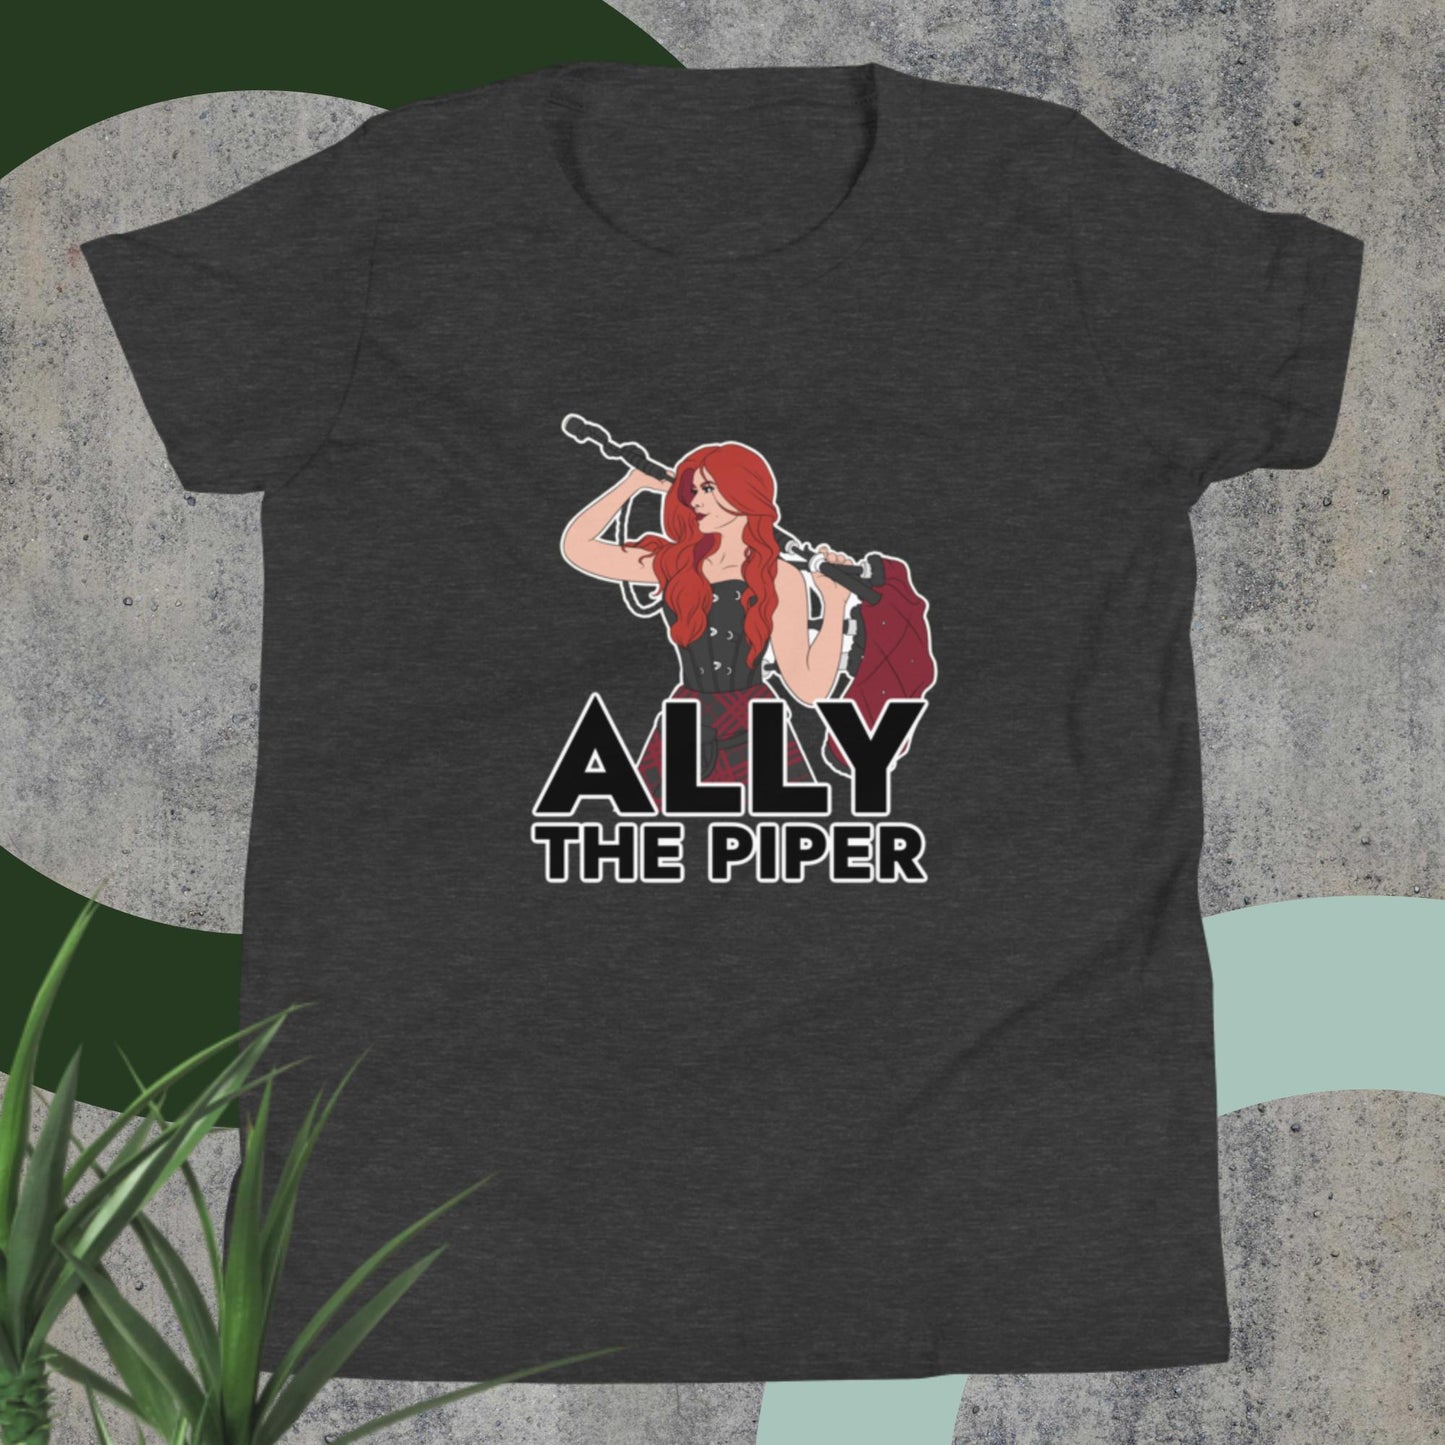 Ally the Piper Youth/Smaller Tee